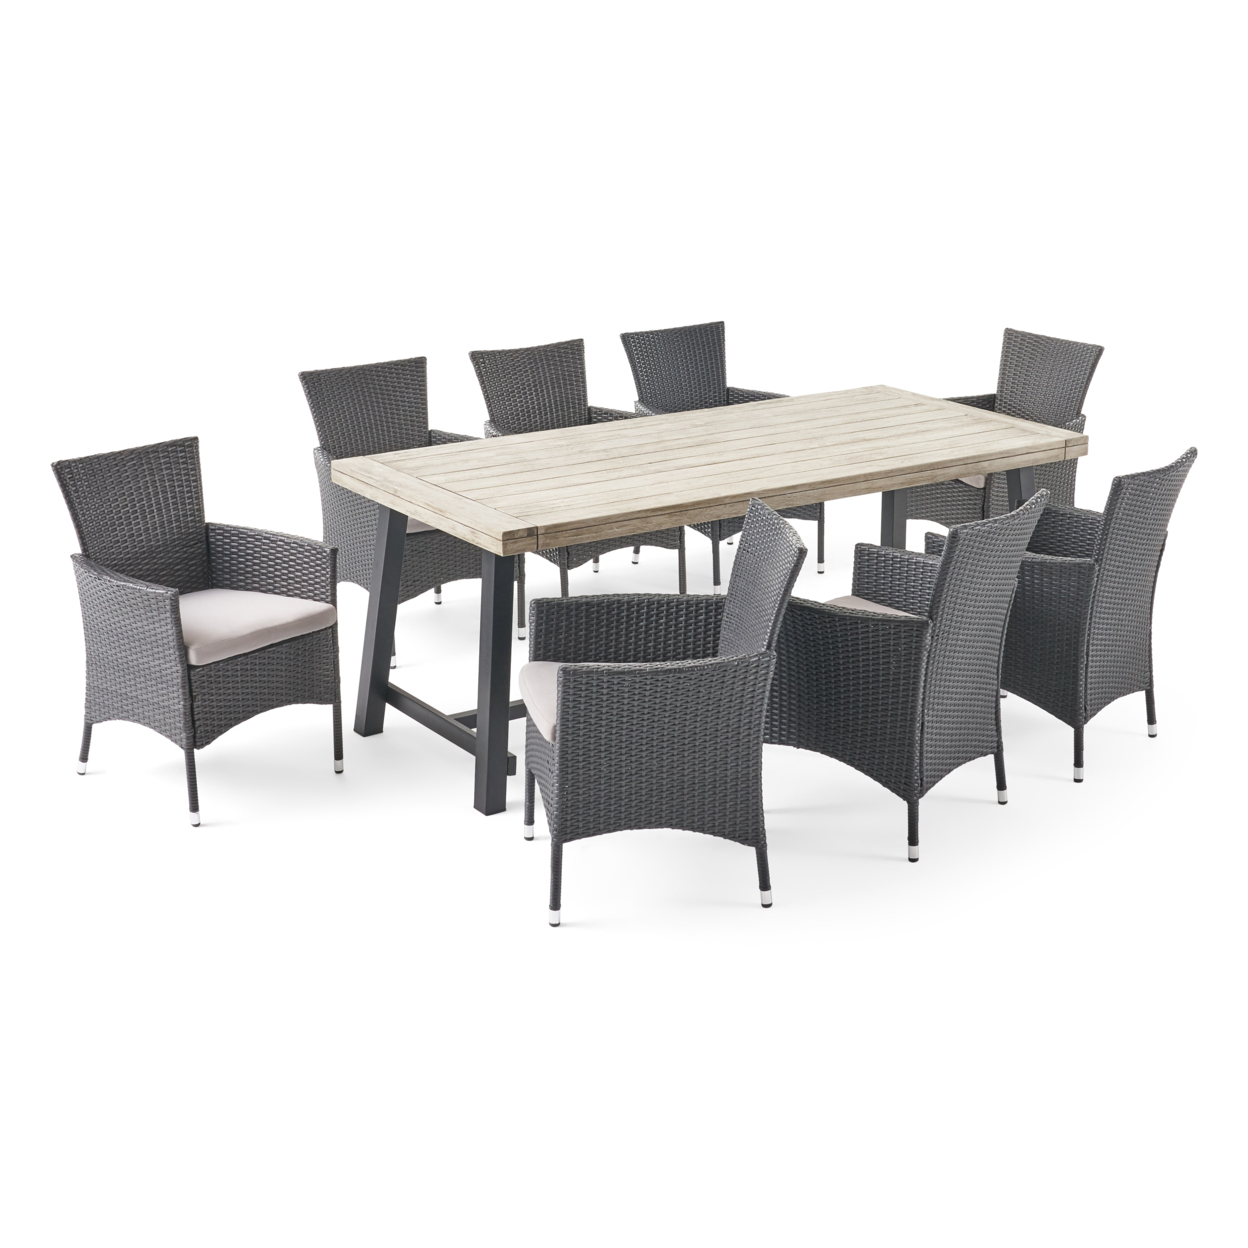 Mayson Outdoor Wood And Wicker 8 Seater Dining Set - Gray, Black, Light Gray